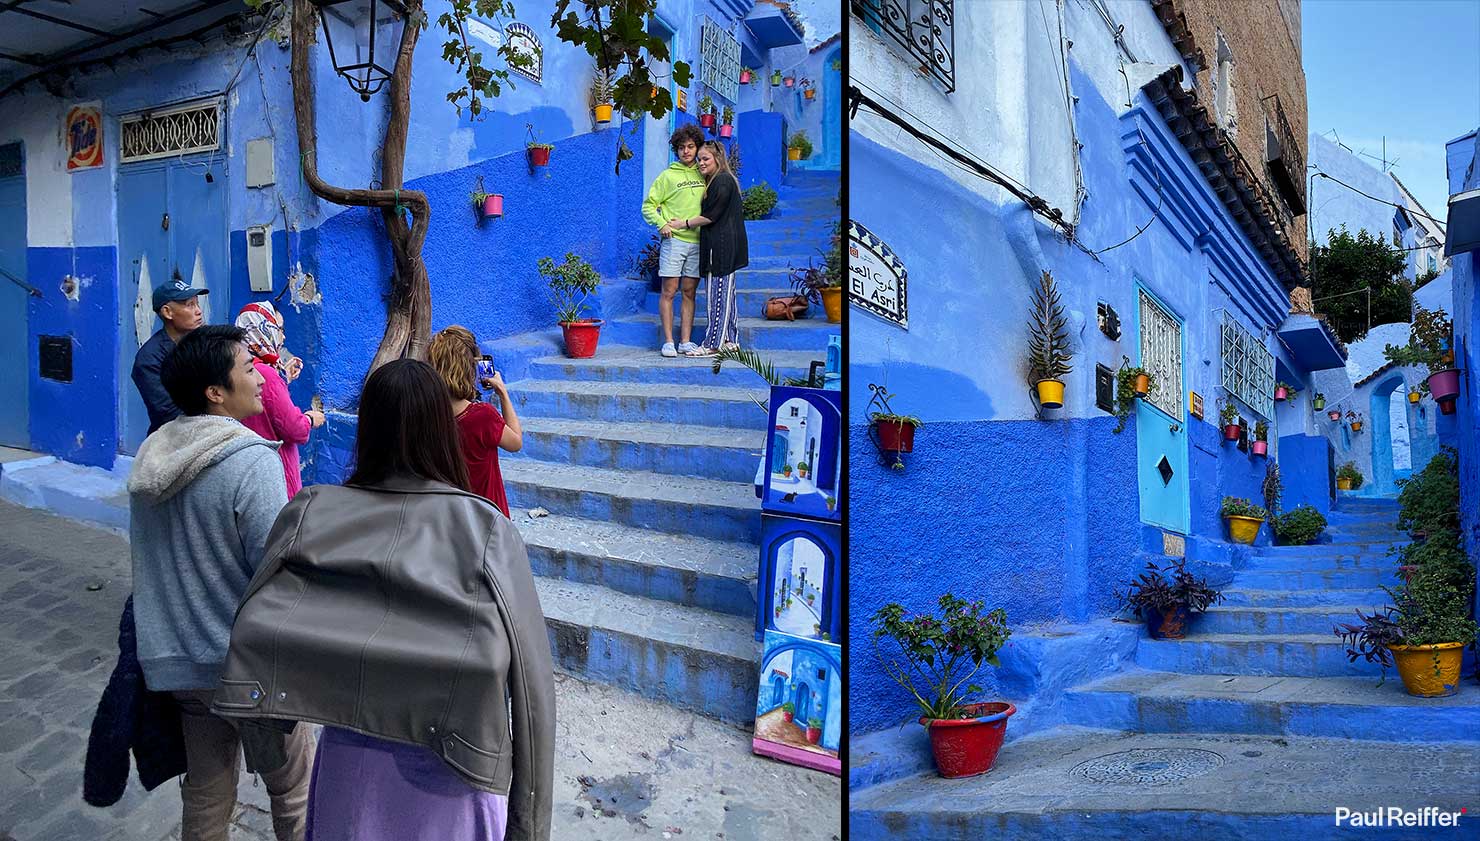 Famous Blue Steps Chefchaouen Morocco Overtourism Instagram Selfies Influencers Bad City Street Paul Reiffer Photographer iPhone Travel Photography Apple Landscape